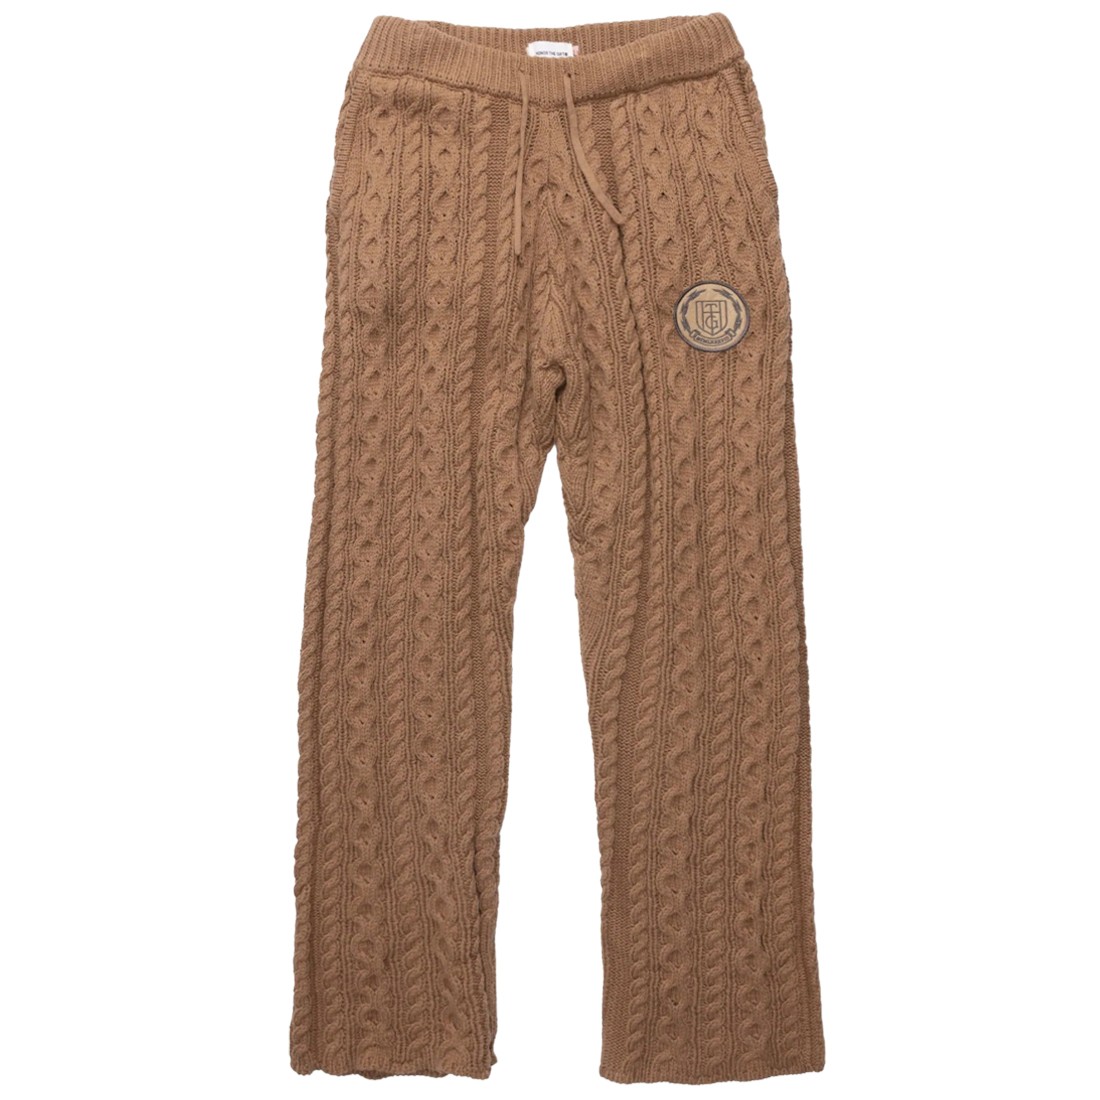 Honor The Gift Men Cable Knit Pants brown tan